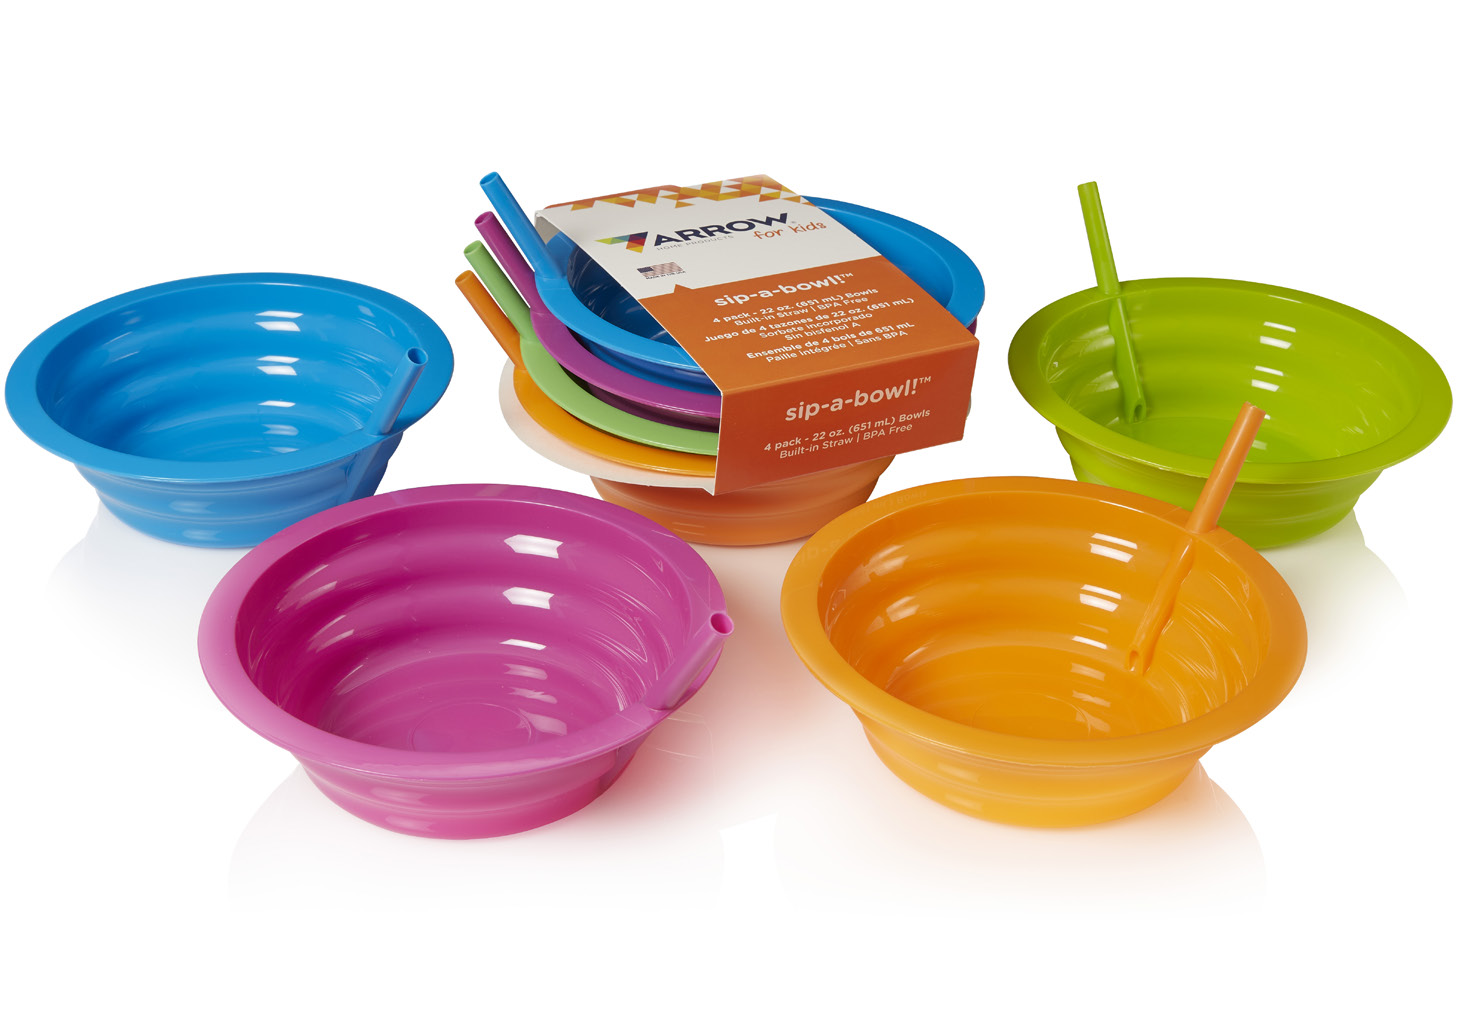 BUILT IN STRAW 2-SIPPY BOWLS BPA FREE COLORFUL MADE IN USA SIP A  BOWL 22oz 